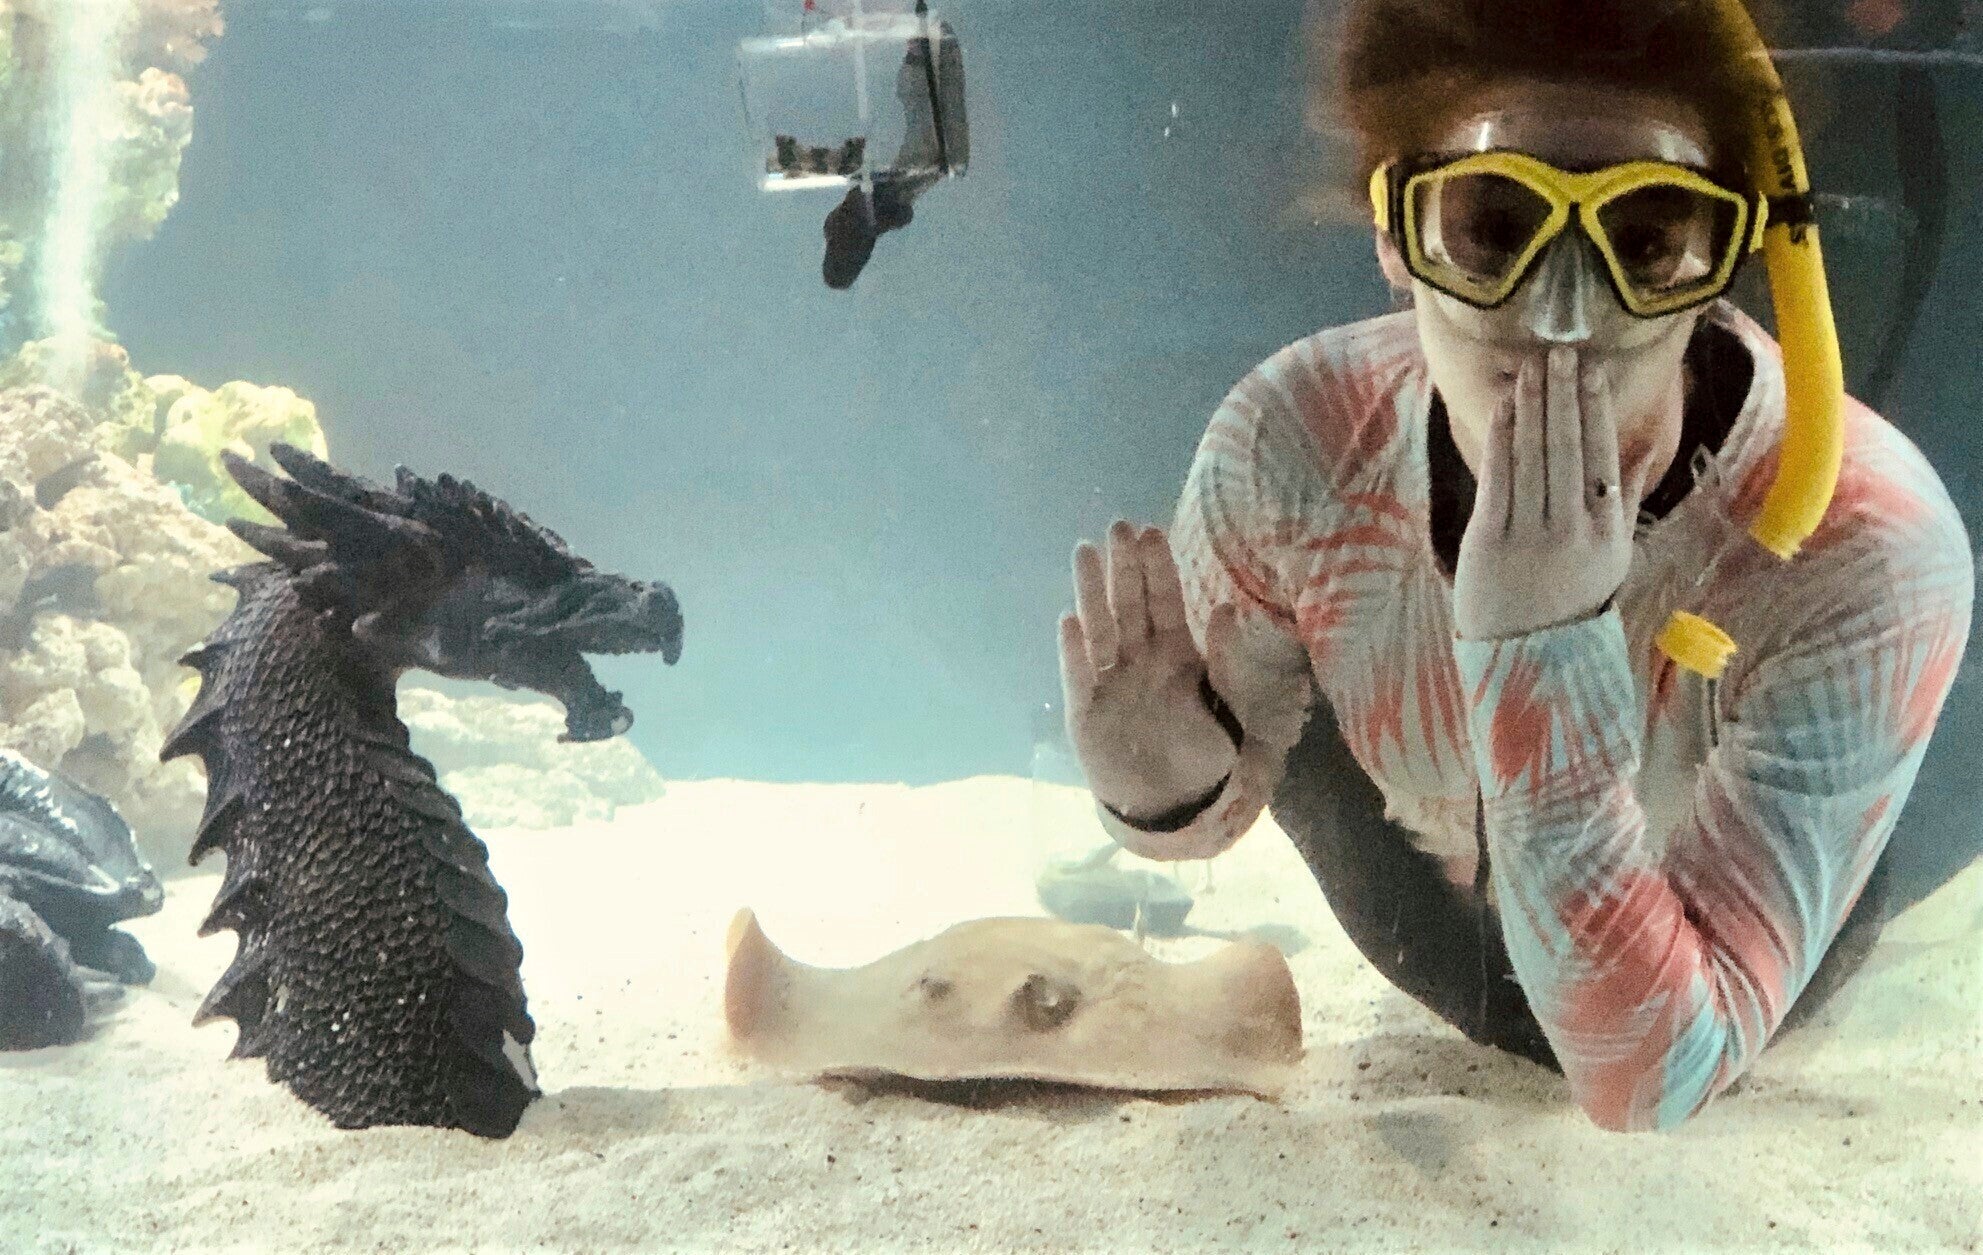 Kinsley Boyette, assistant director of the Aquarium and Shark Lab by Team ECCO, poses in this undated photo next to Charlotte, a round stingray, in Hendersonville